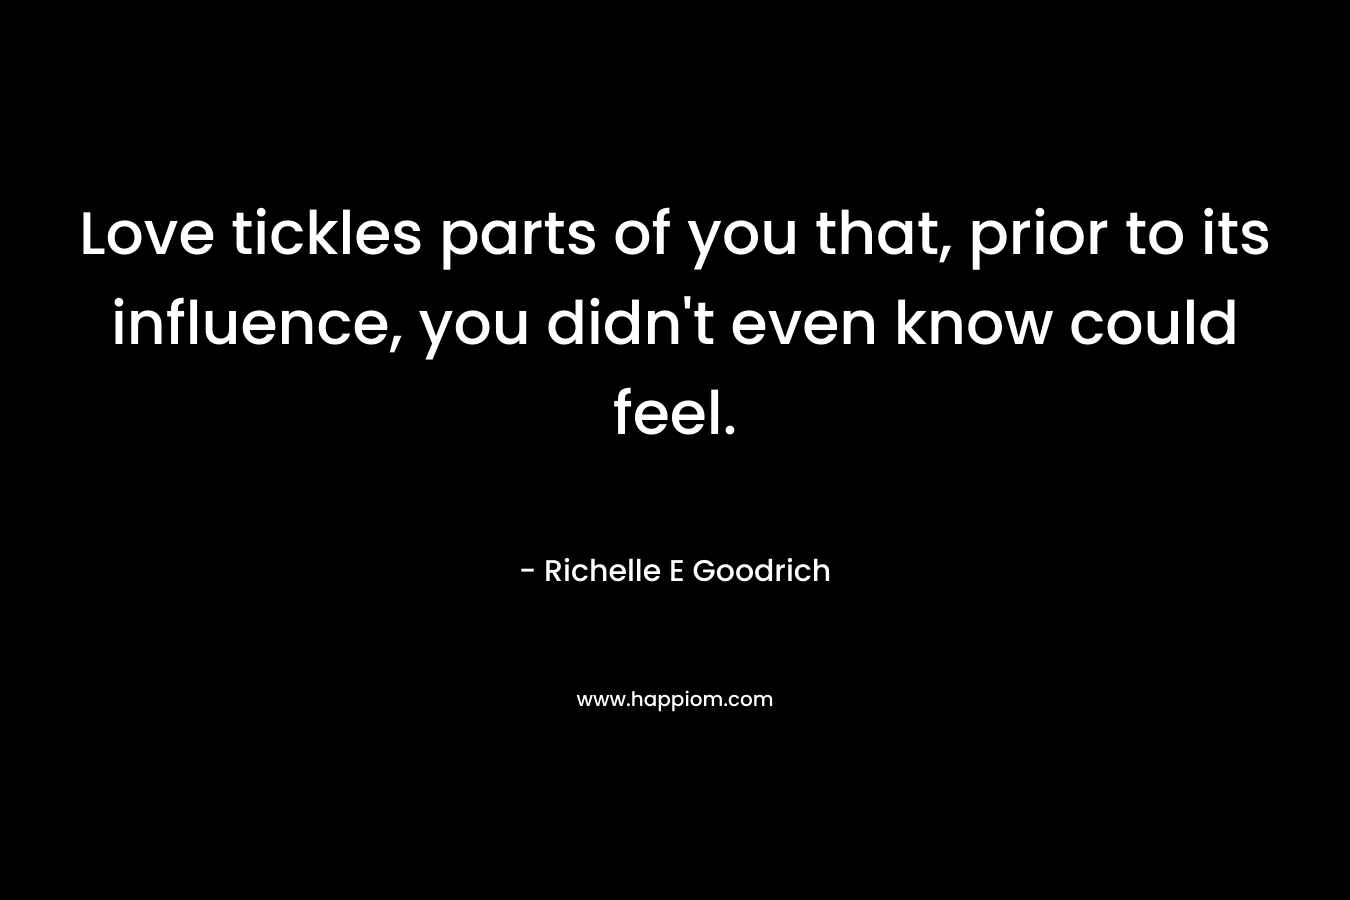 Love tickles parts of you that, prior to its influence, you didn't even know could feel.